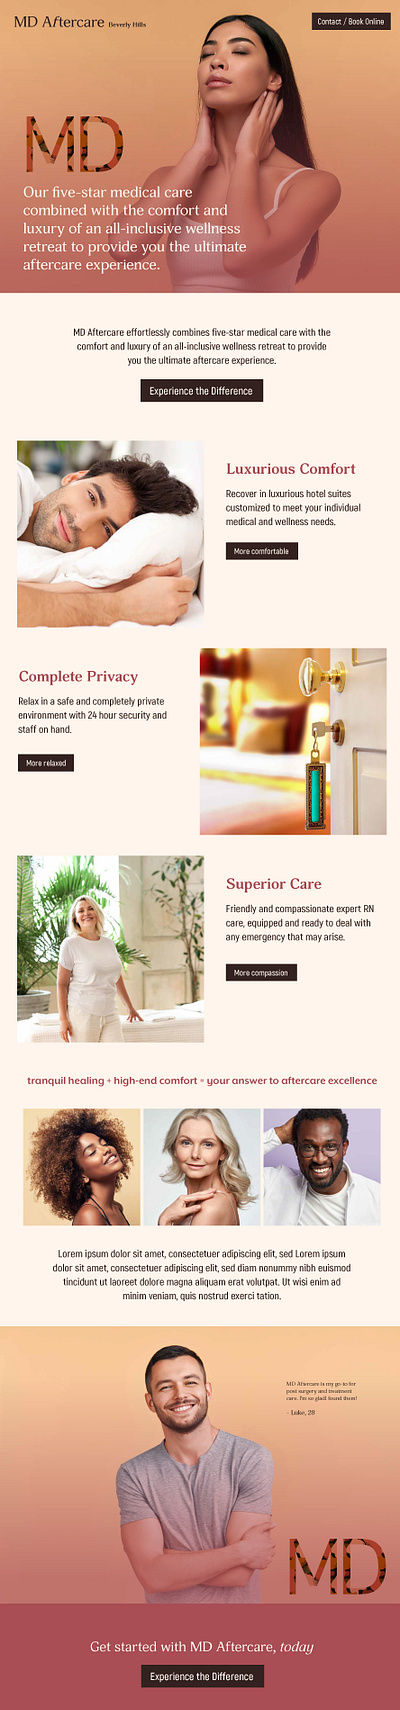 "MD Aftercare" Website and Branding Concepts